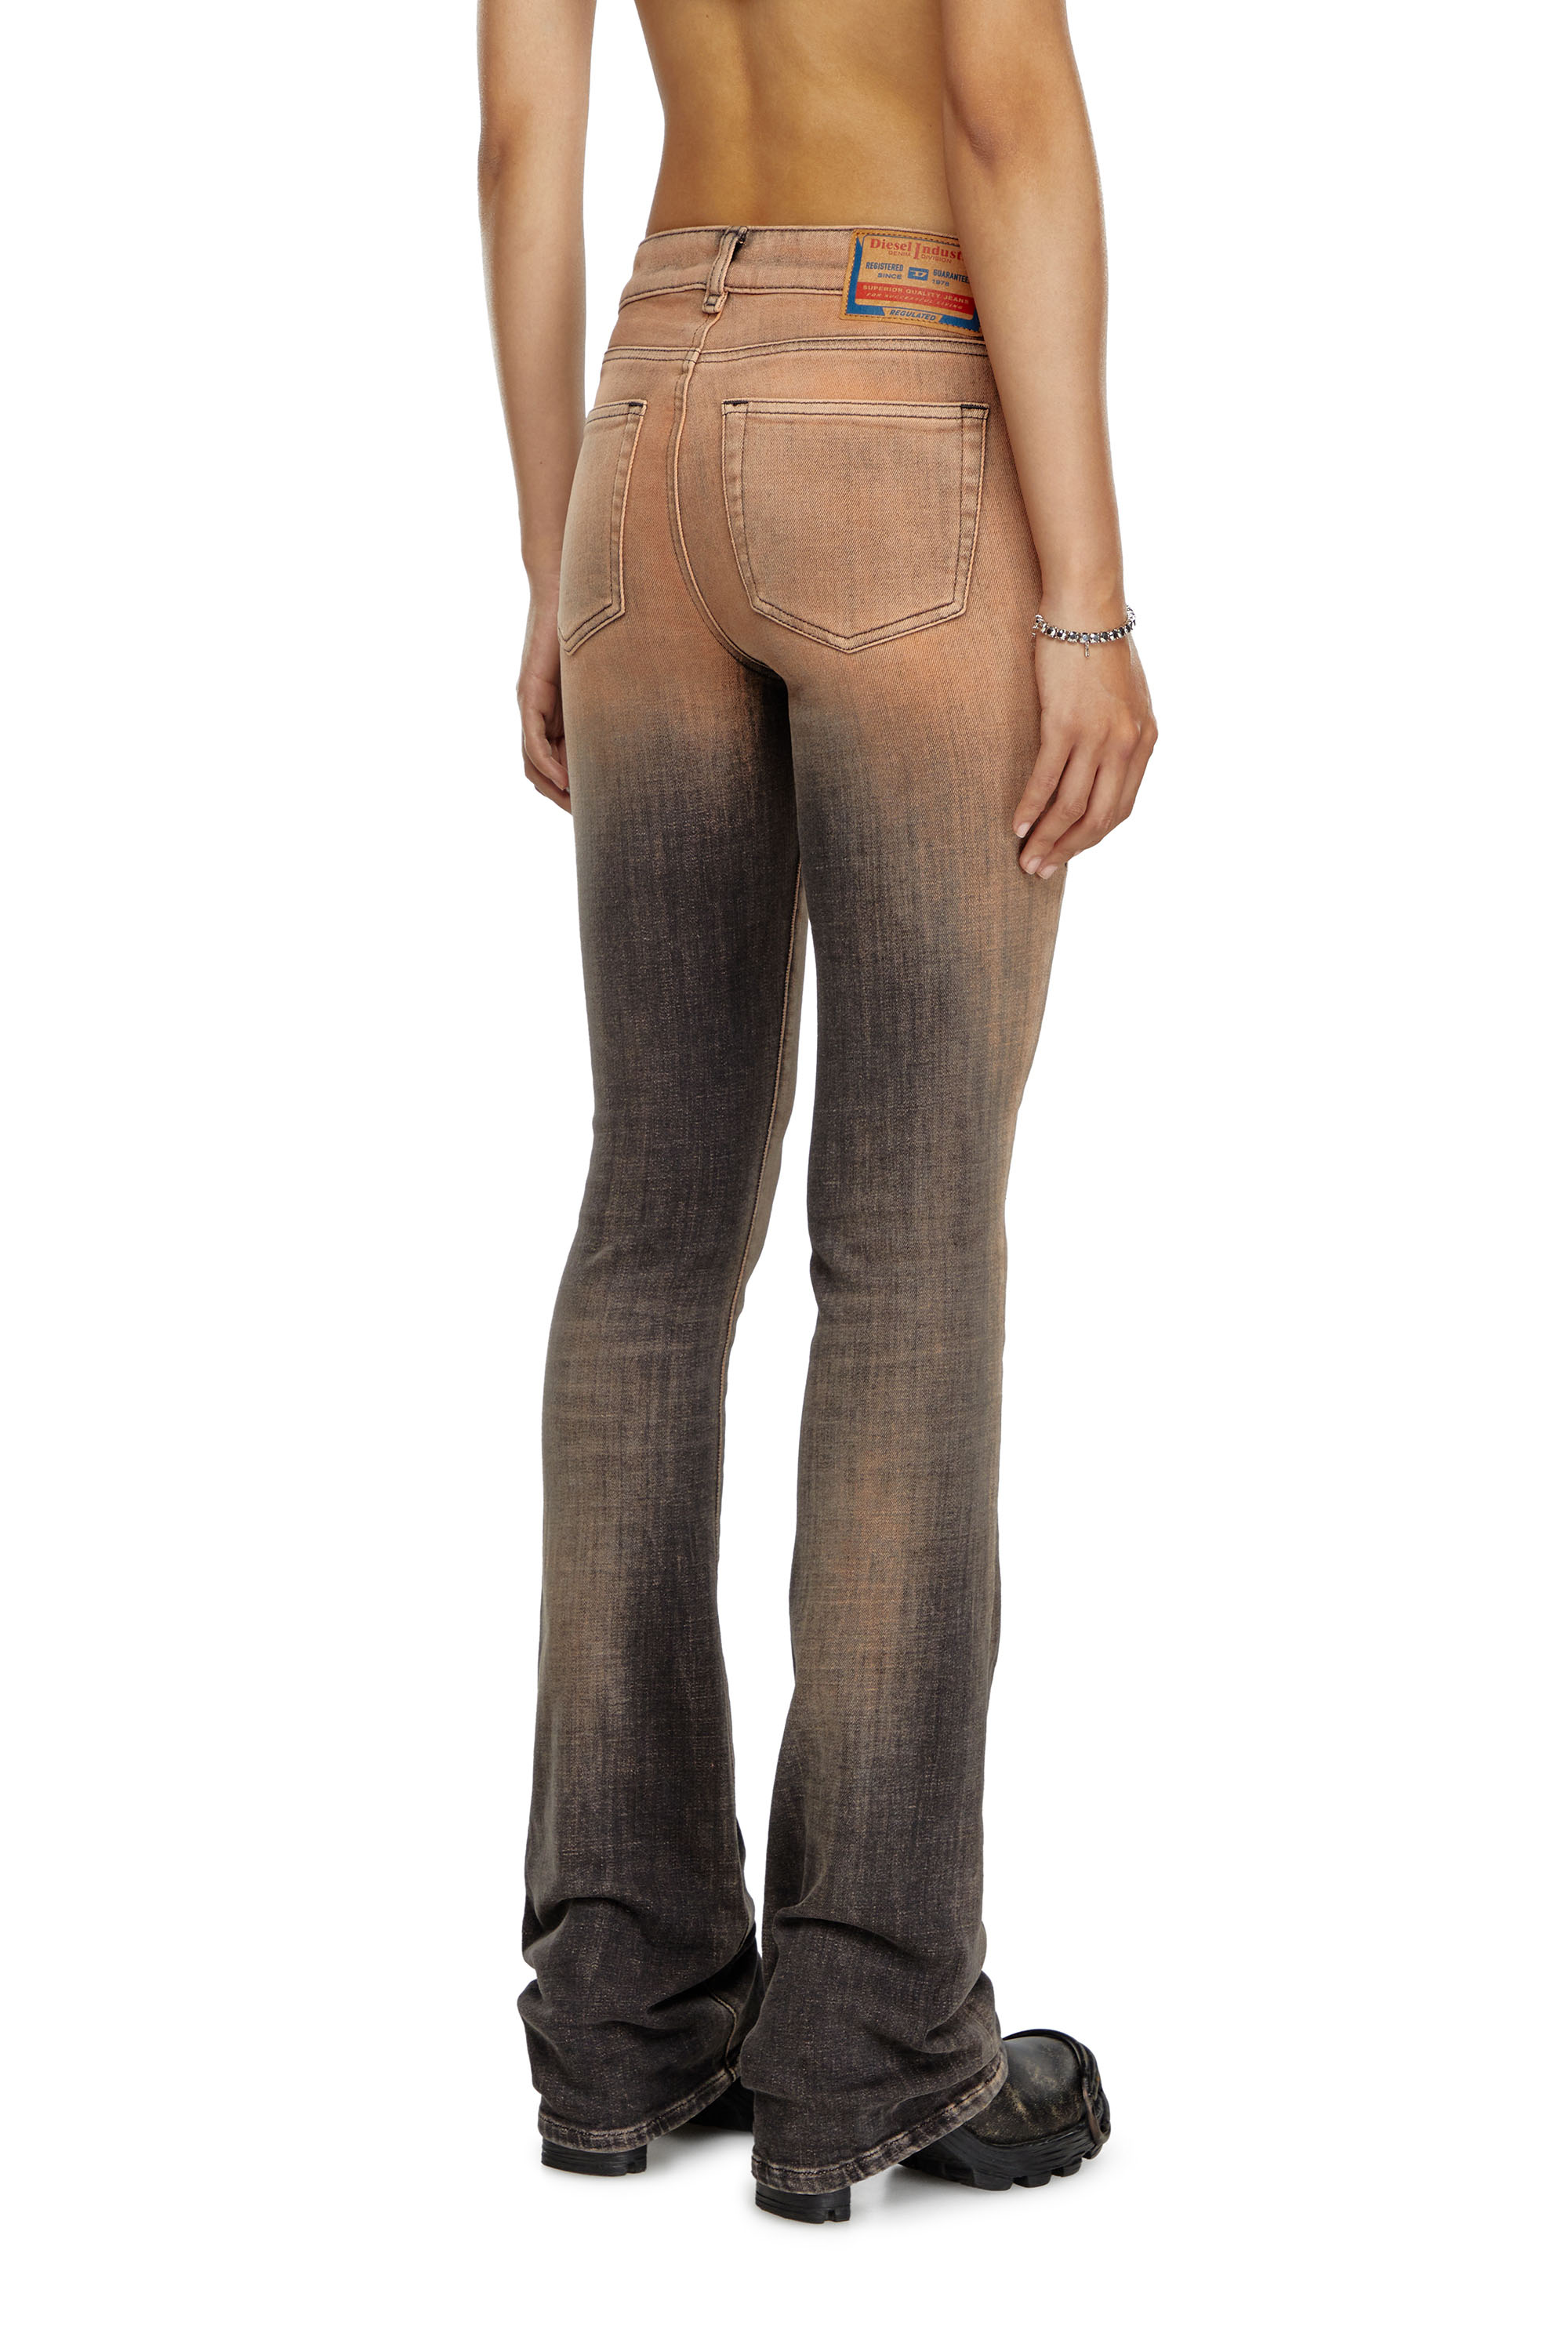 Diesel - Bootcut and Flare Jeans 1969 D-Ebbey 09K12, Mujer Bootcut y Flare Jeans - 1969 D-Ebbey in Multicolor - Image 3